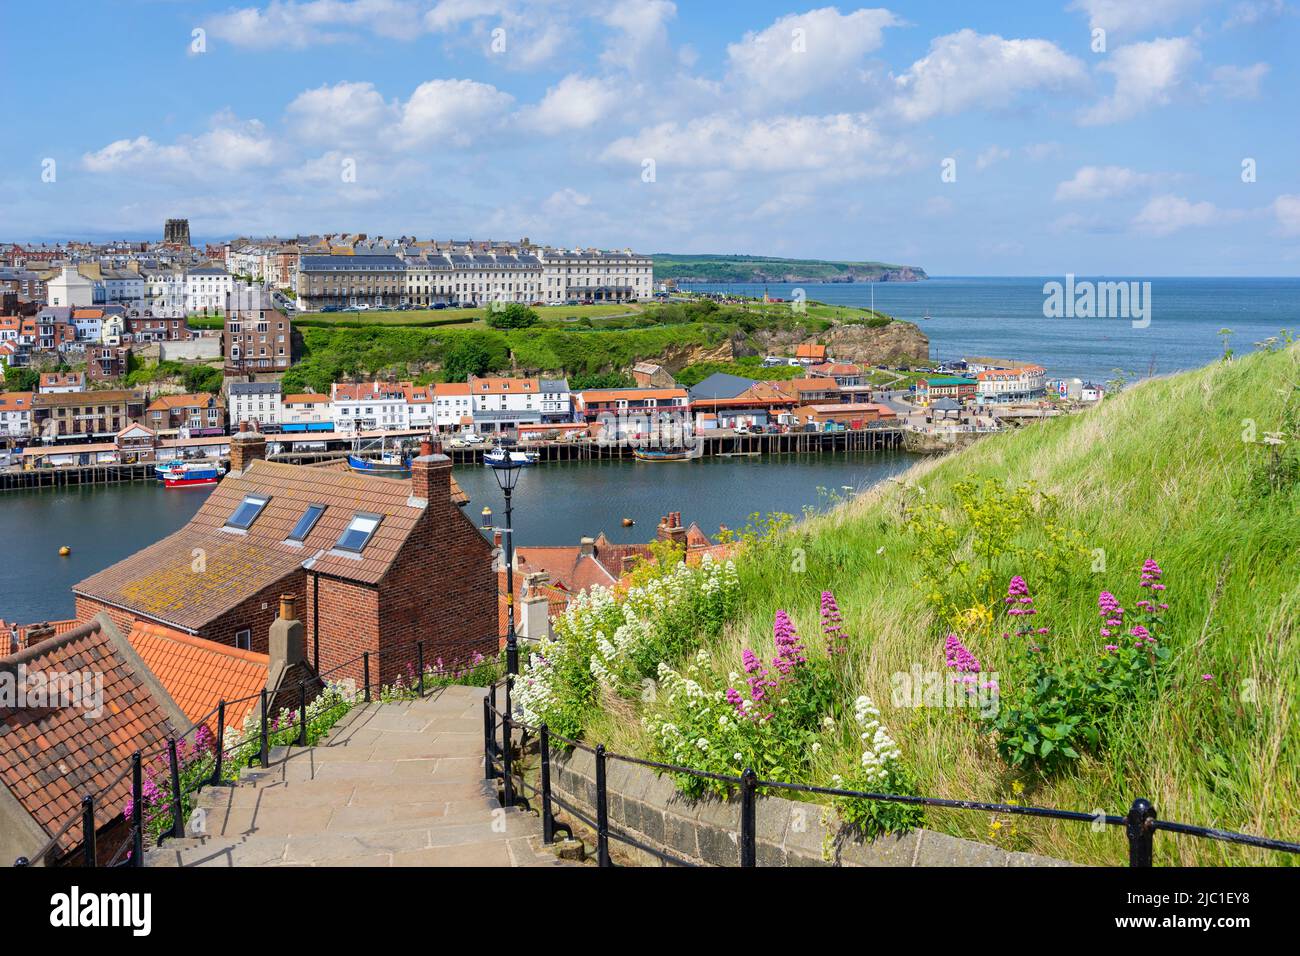 Whitby Yorkshire Whitby North Yorkshire England Great Britain UK GB Europe Stock Photo